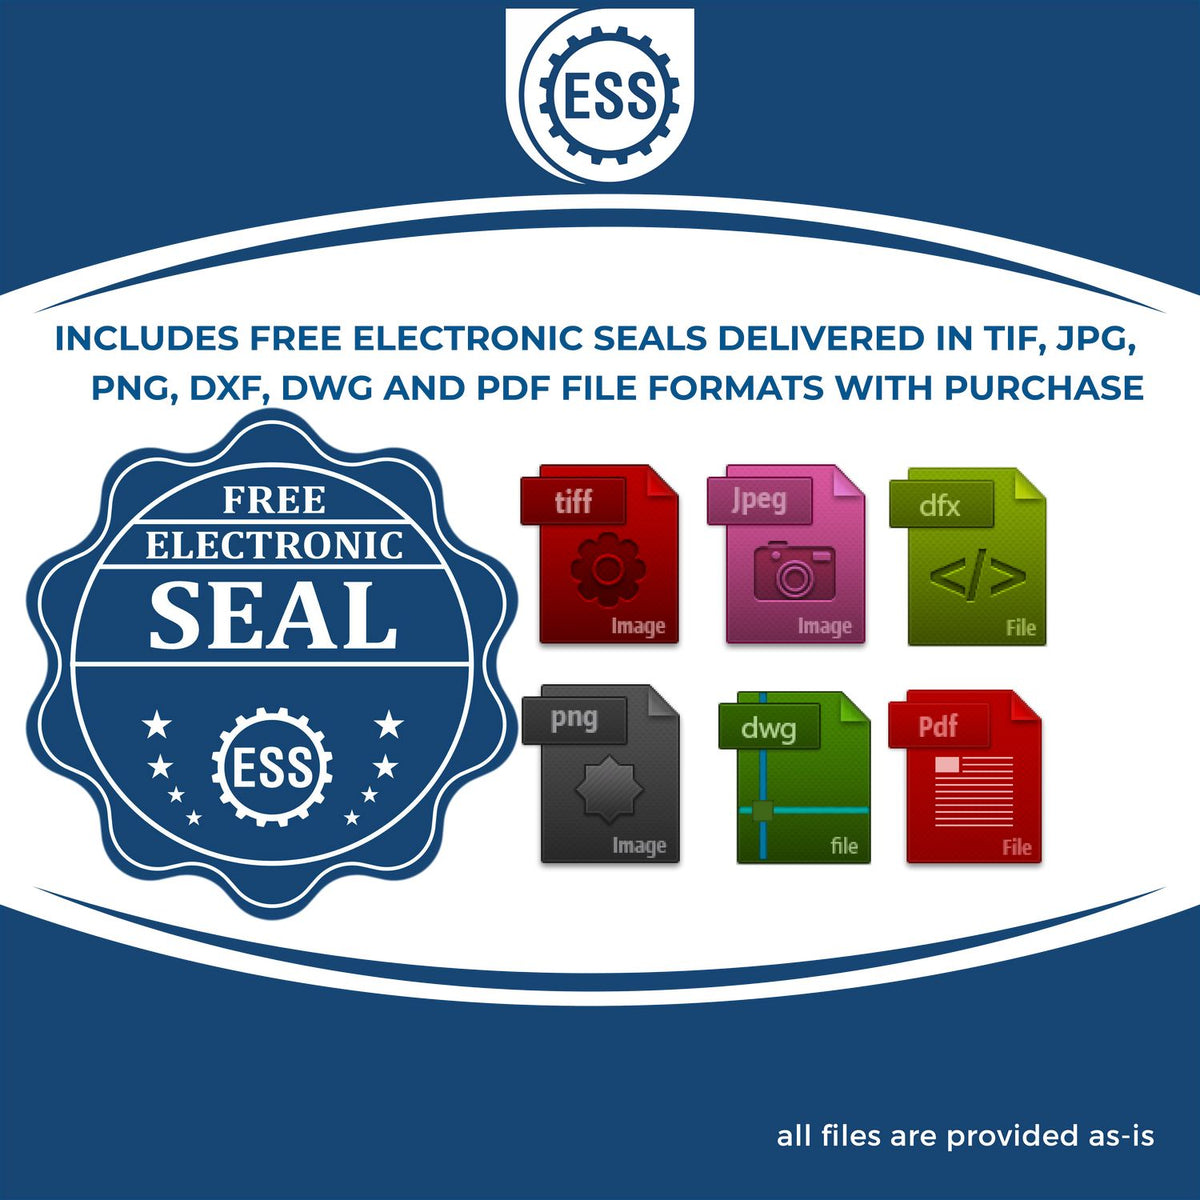 An infographic for the free electronic seal for the Extended Long Reach Delaware Surveyor Embosser illustrating the different file type icons such as DXF, DWG, TIF, JPG and PNG.